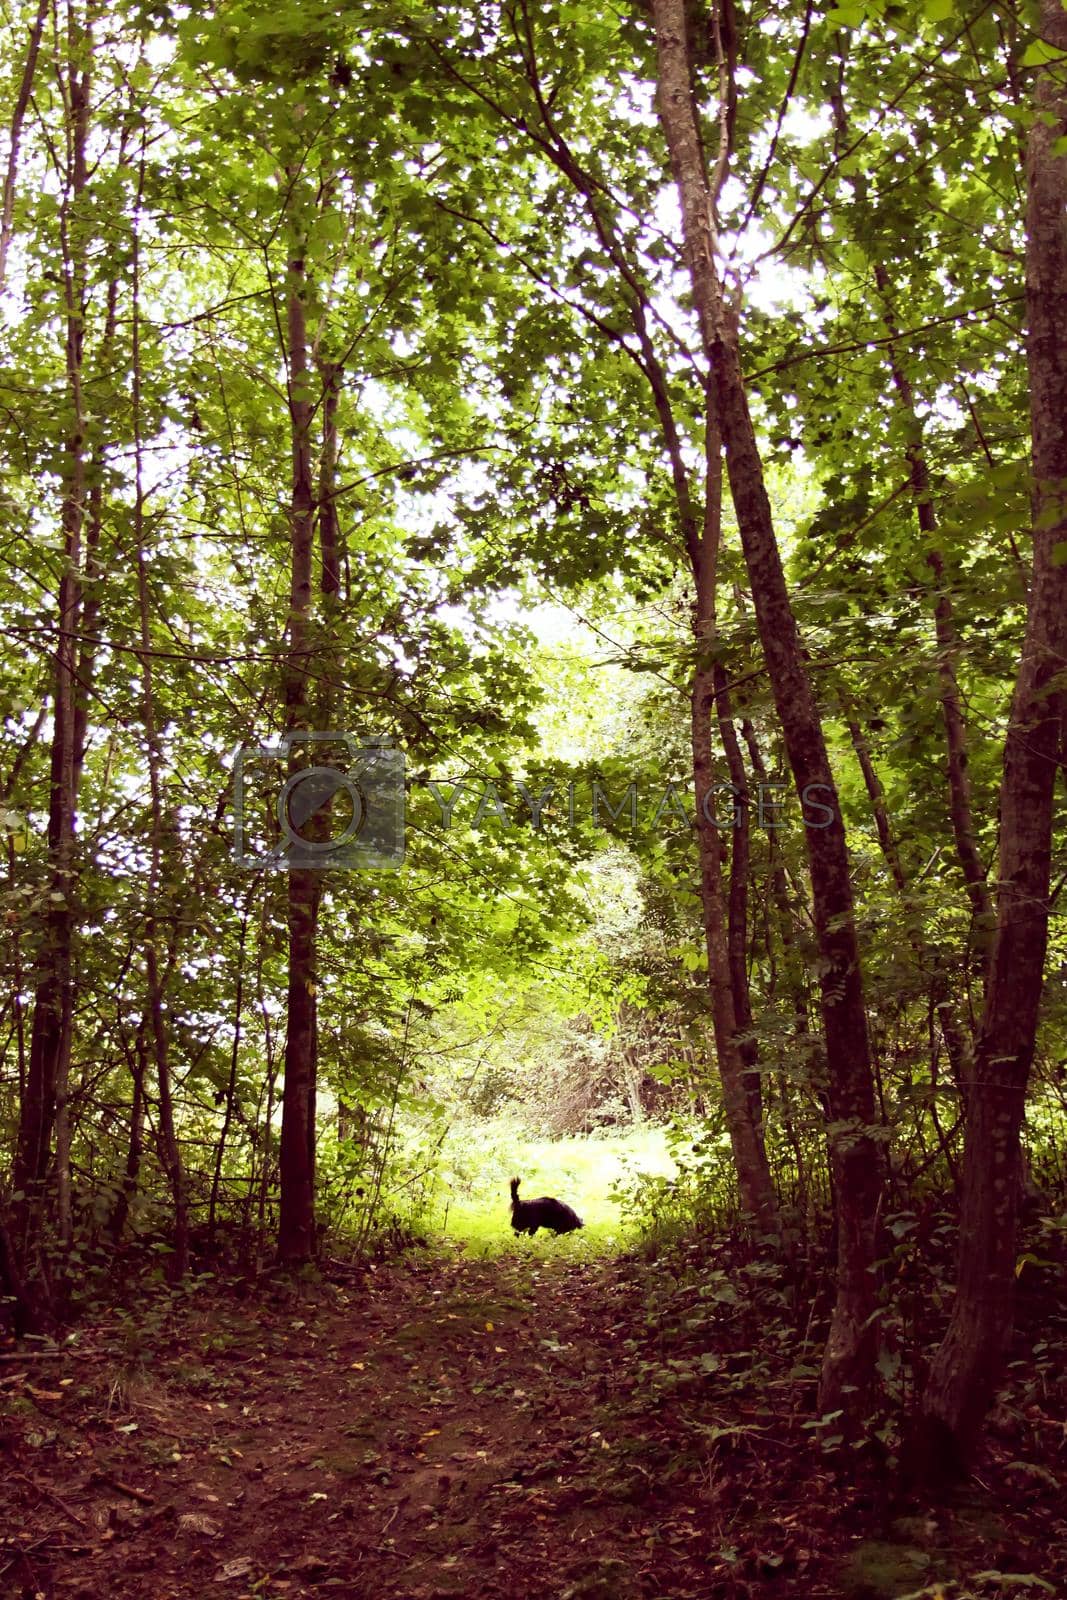 Summer forest in Europe. Nature in countryside. Little black dog walking outdoors.